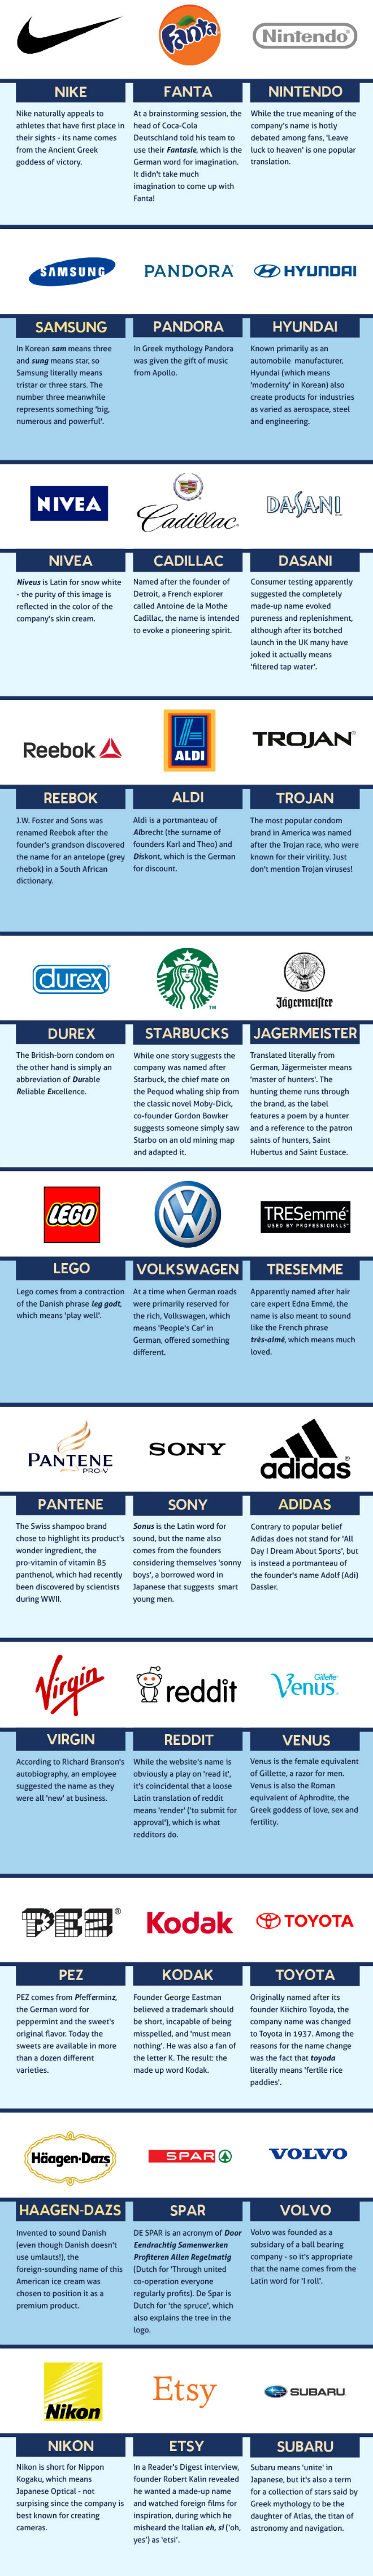 The-Meaning-of-Brand-Names